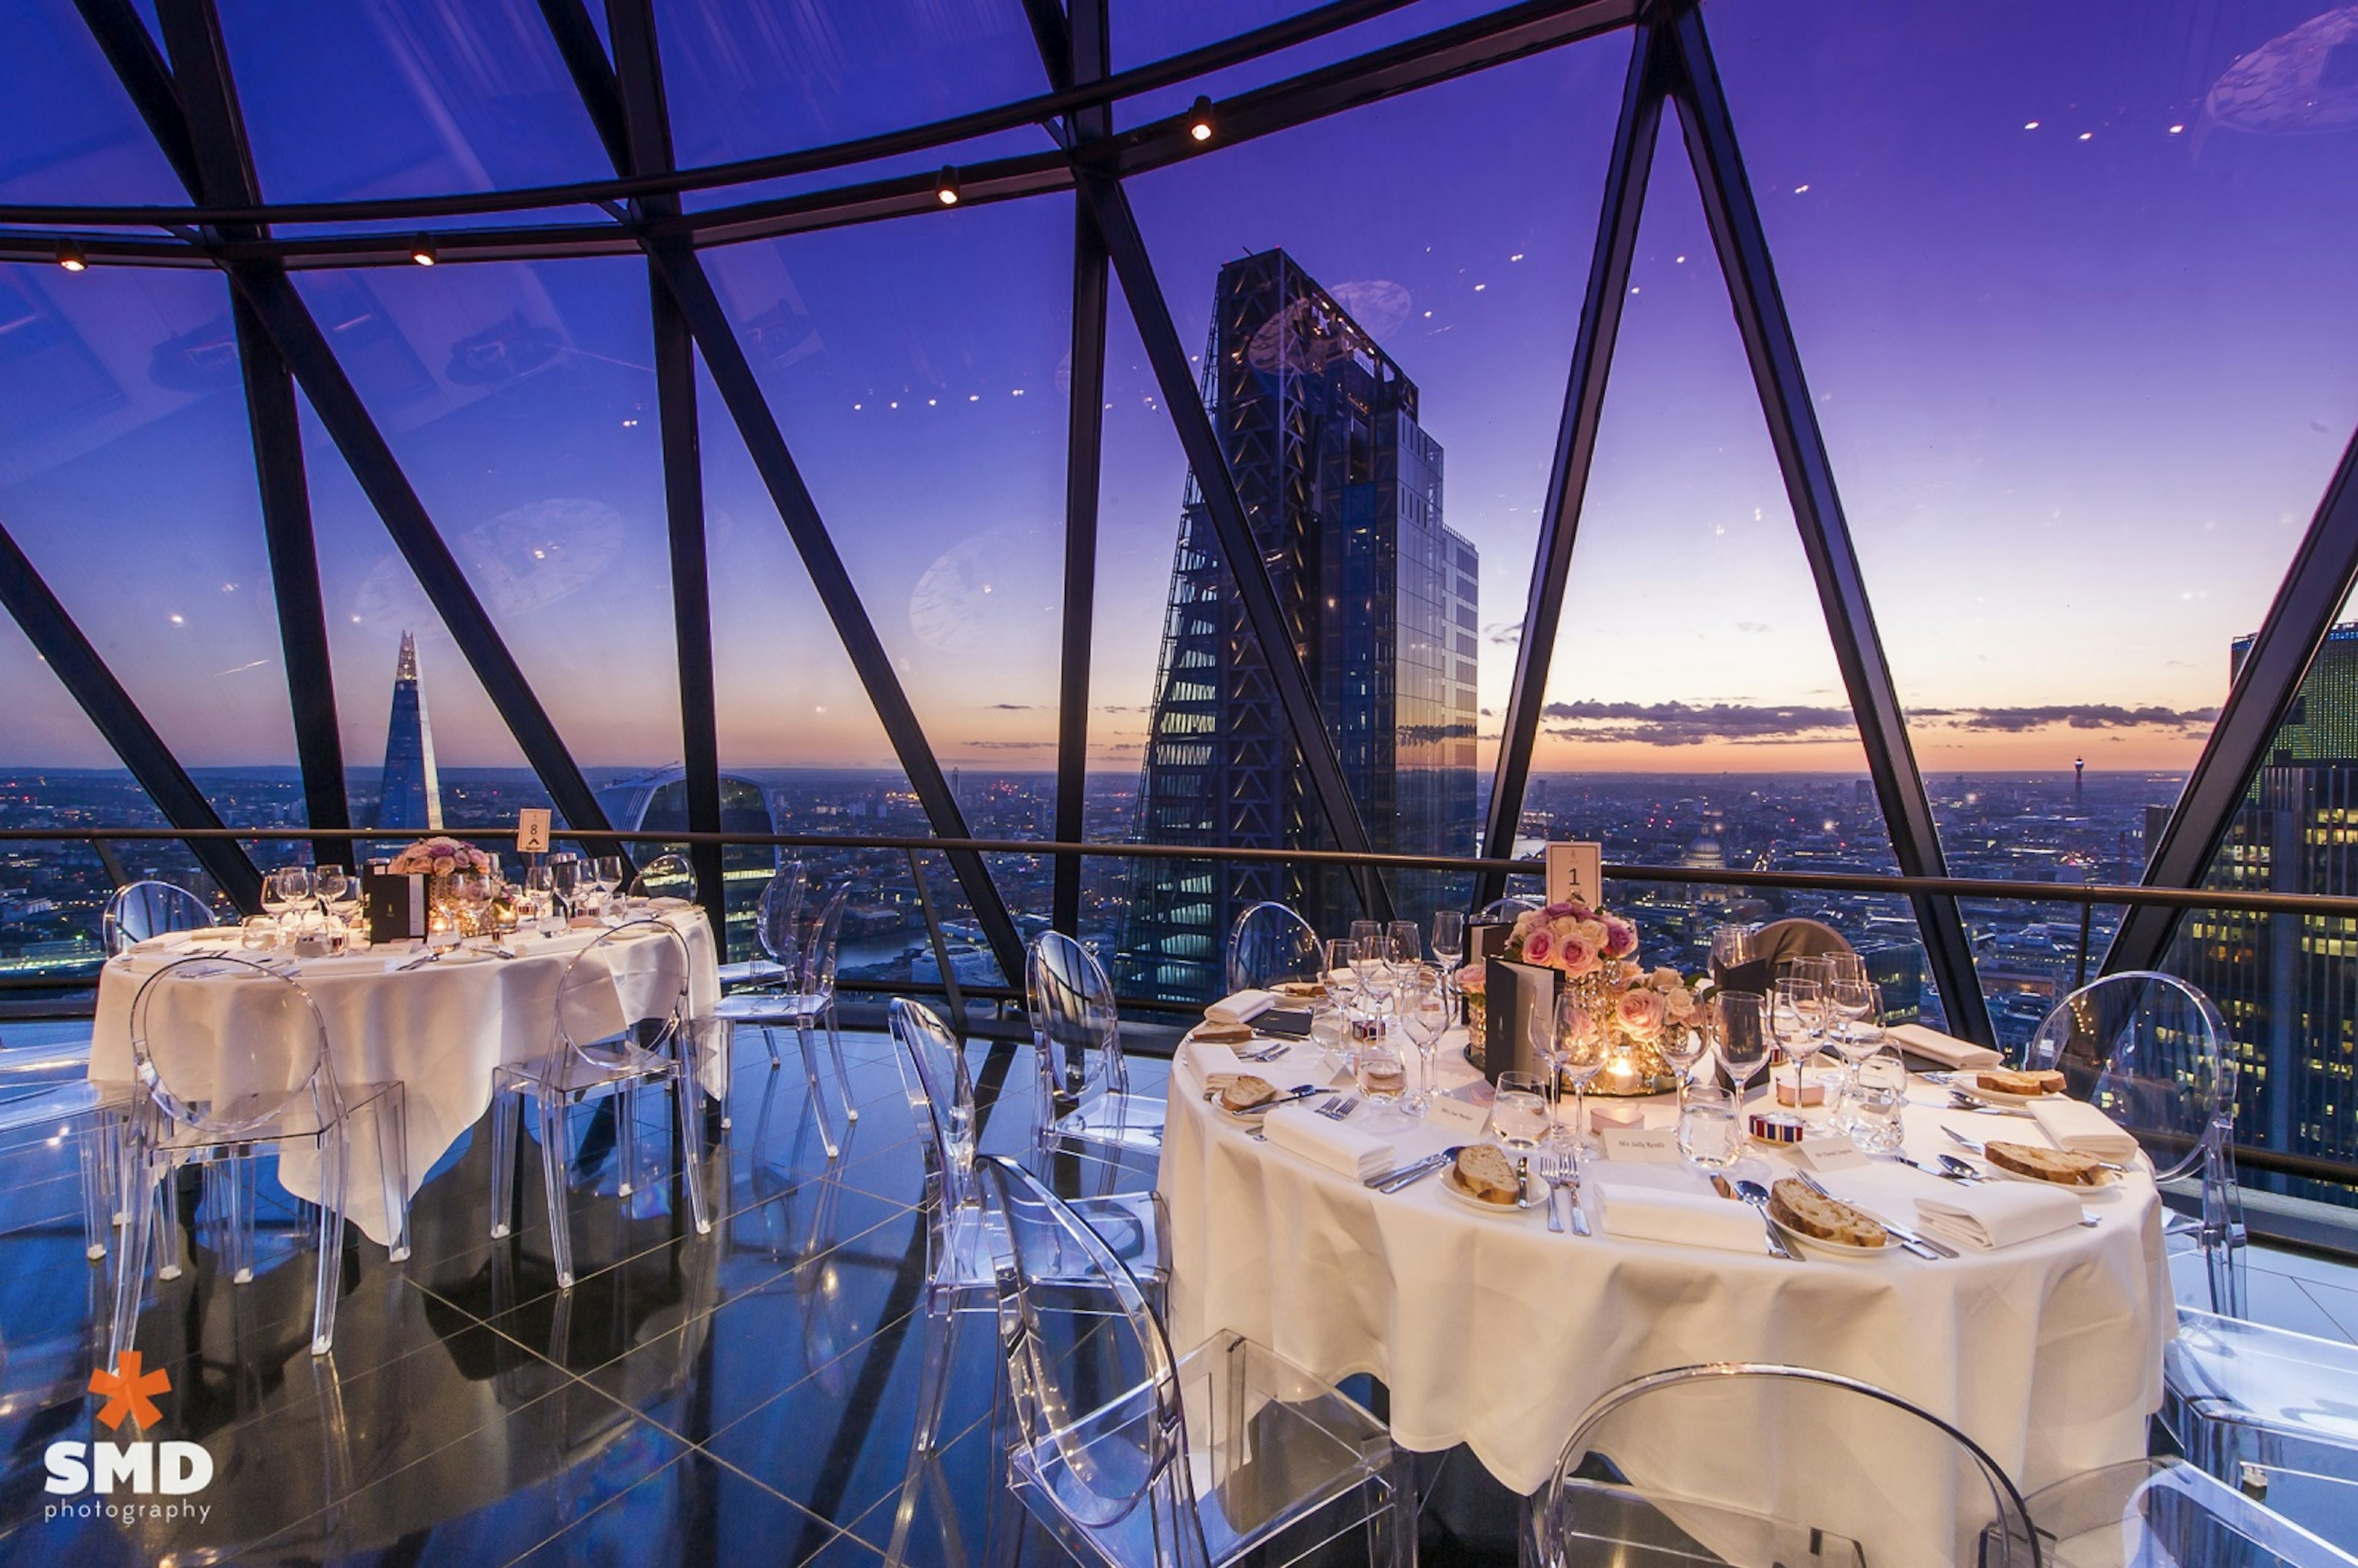 Luxury Wedding Venues - Searcys at the Gherkin - Weddings in Exclusive hire of Helix and Iris - Banner